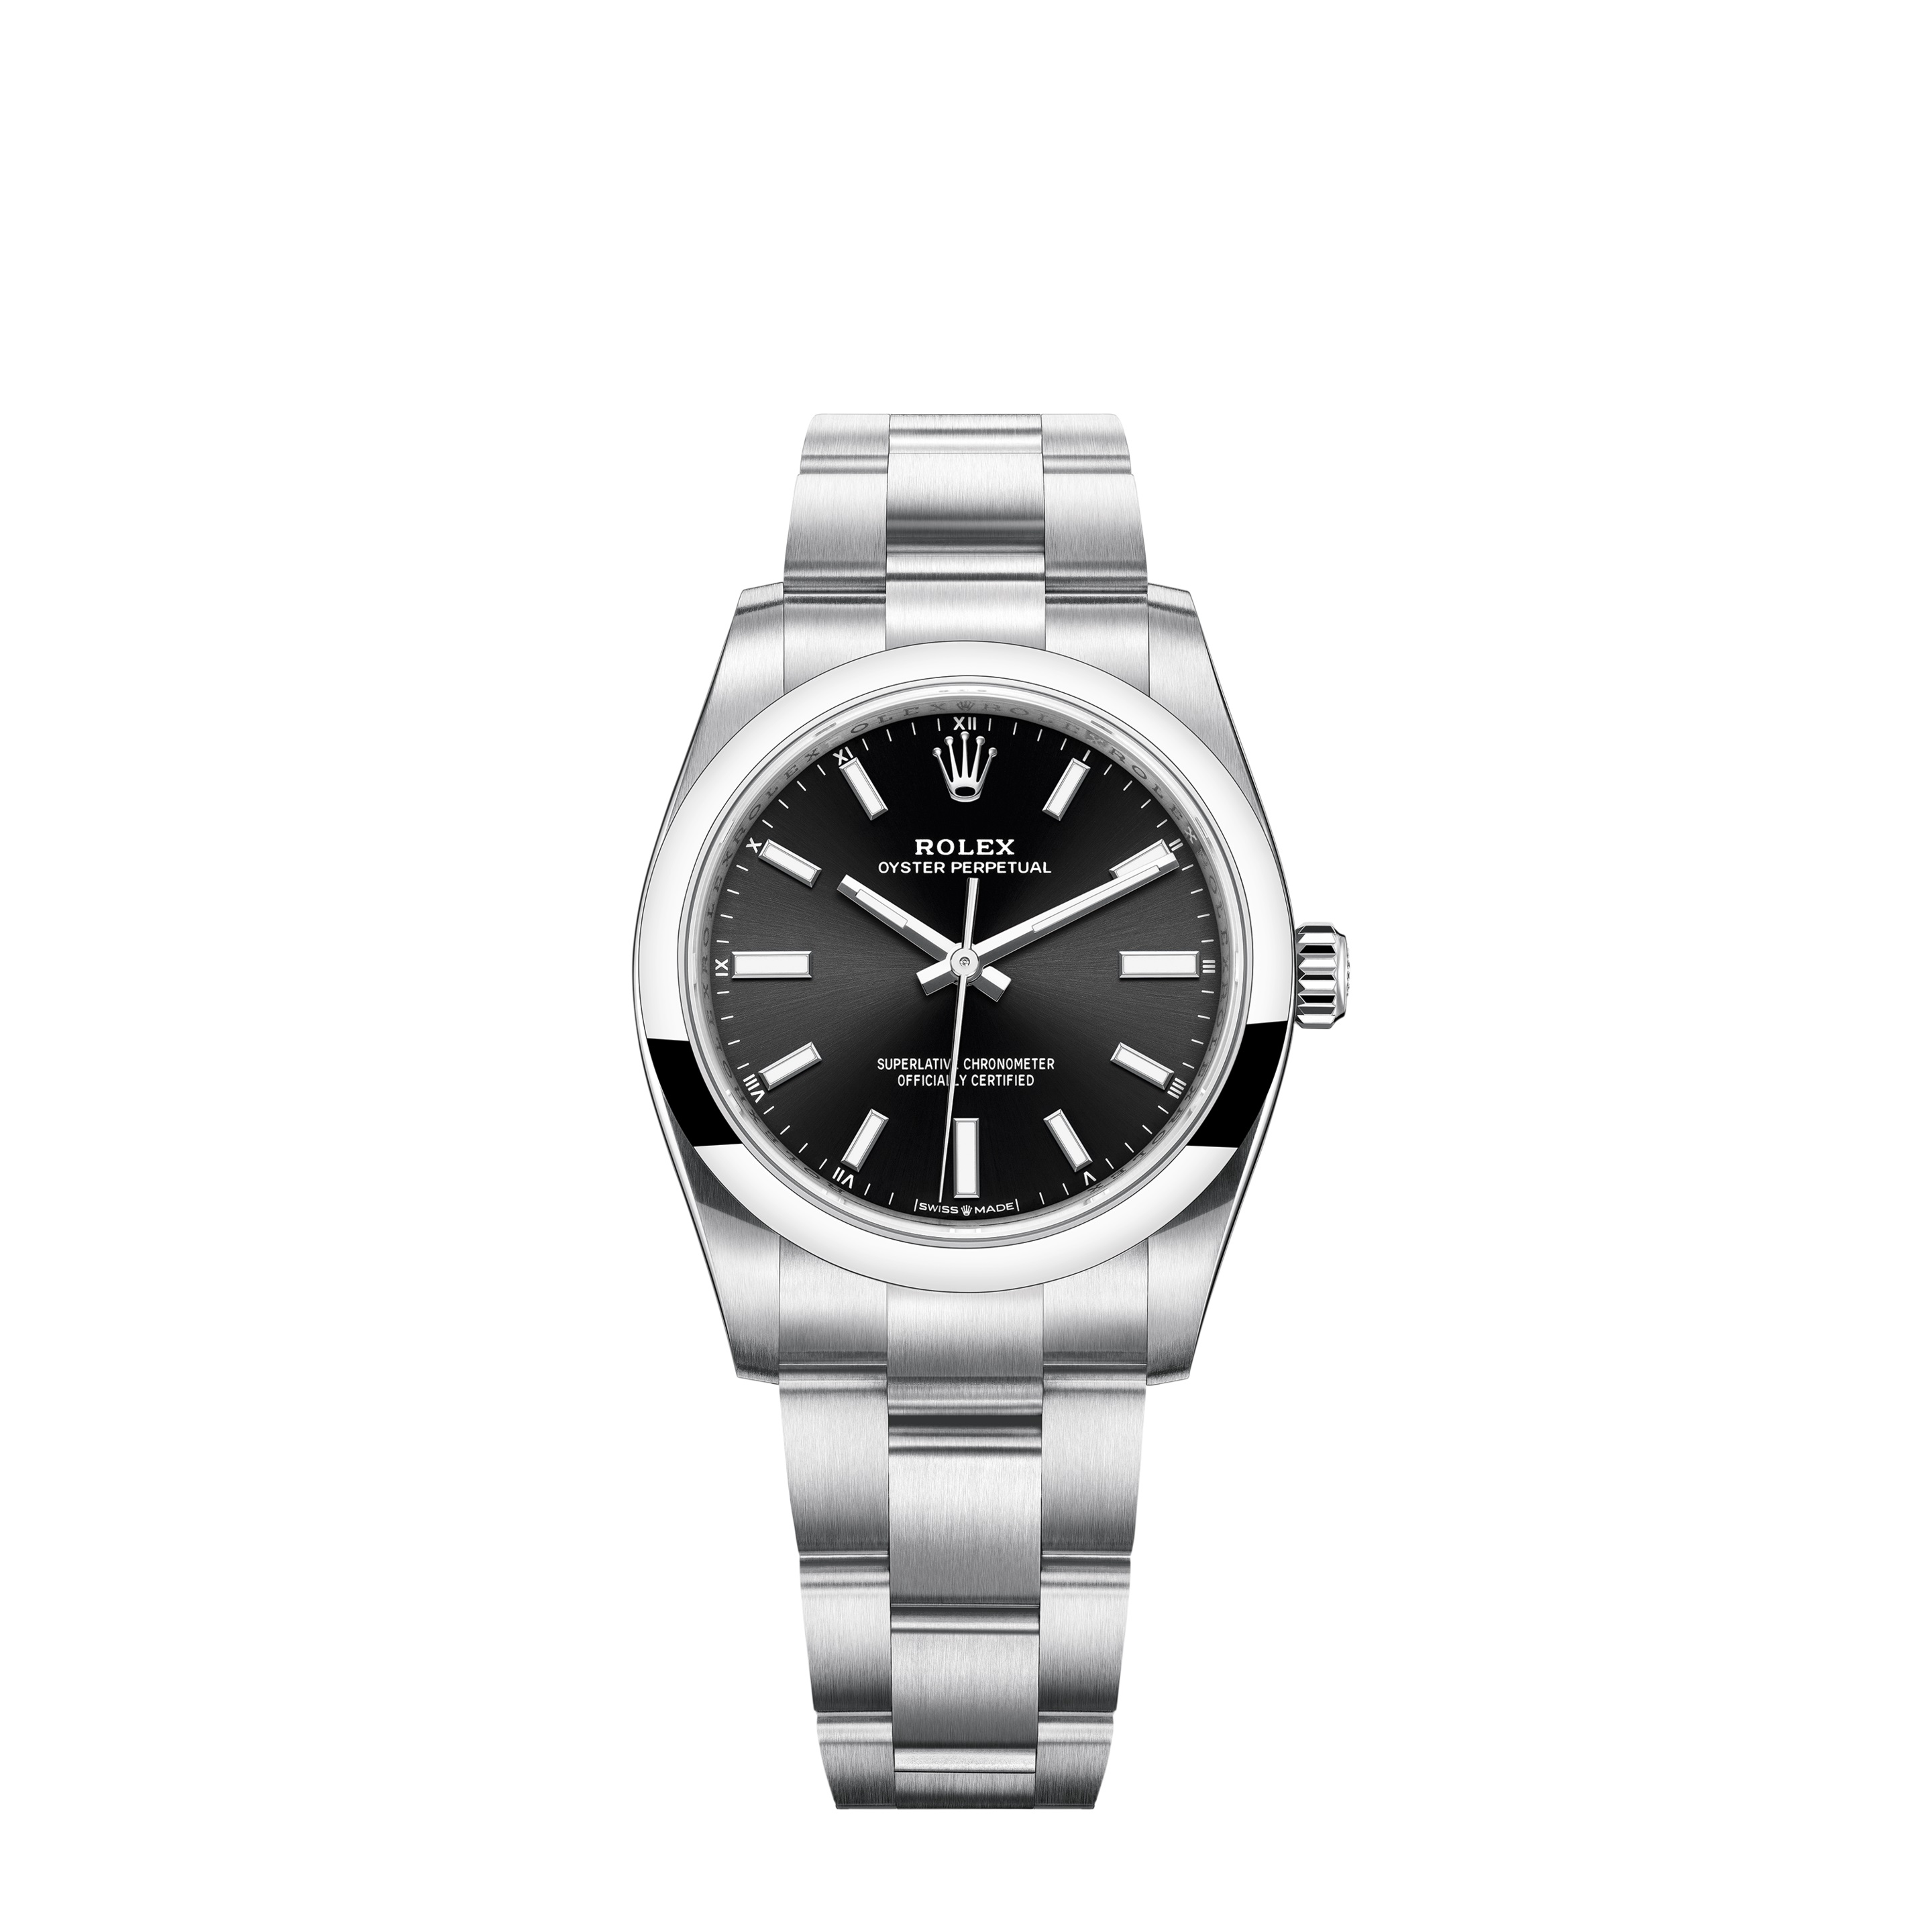 Oyster Perpetual 34 124200 Stainless Steel Watch (Bright Black)